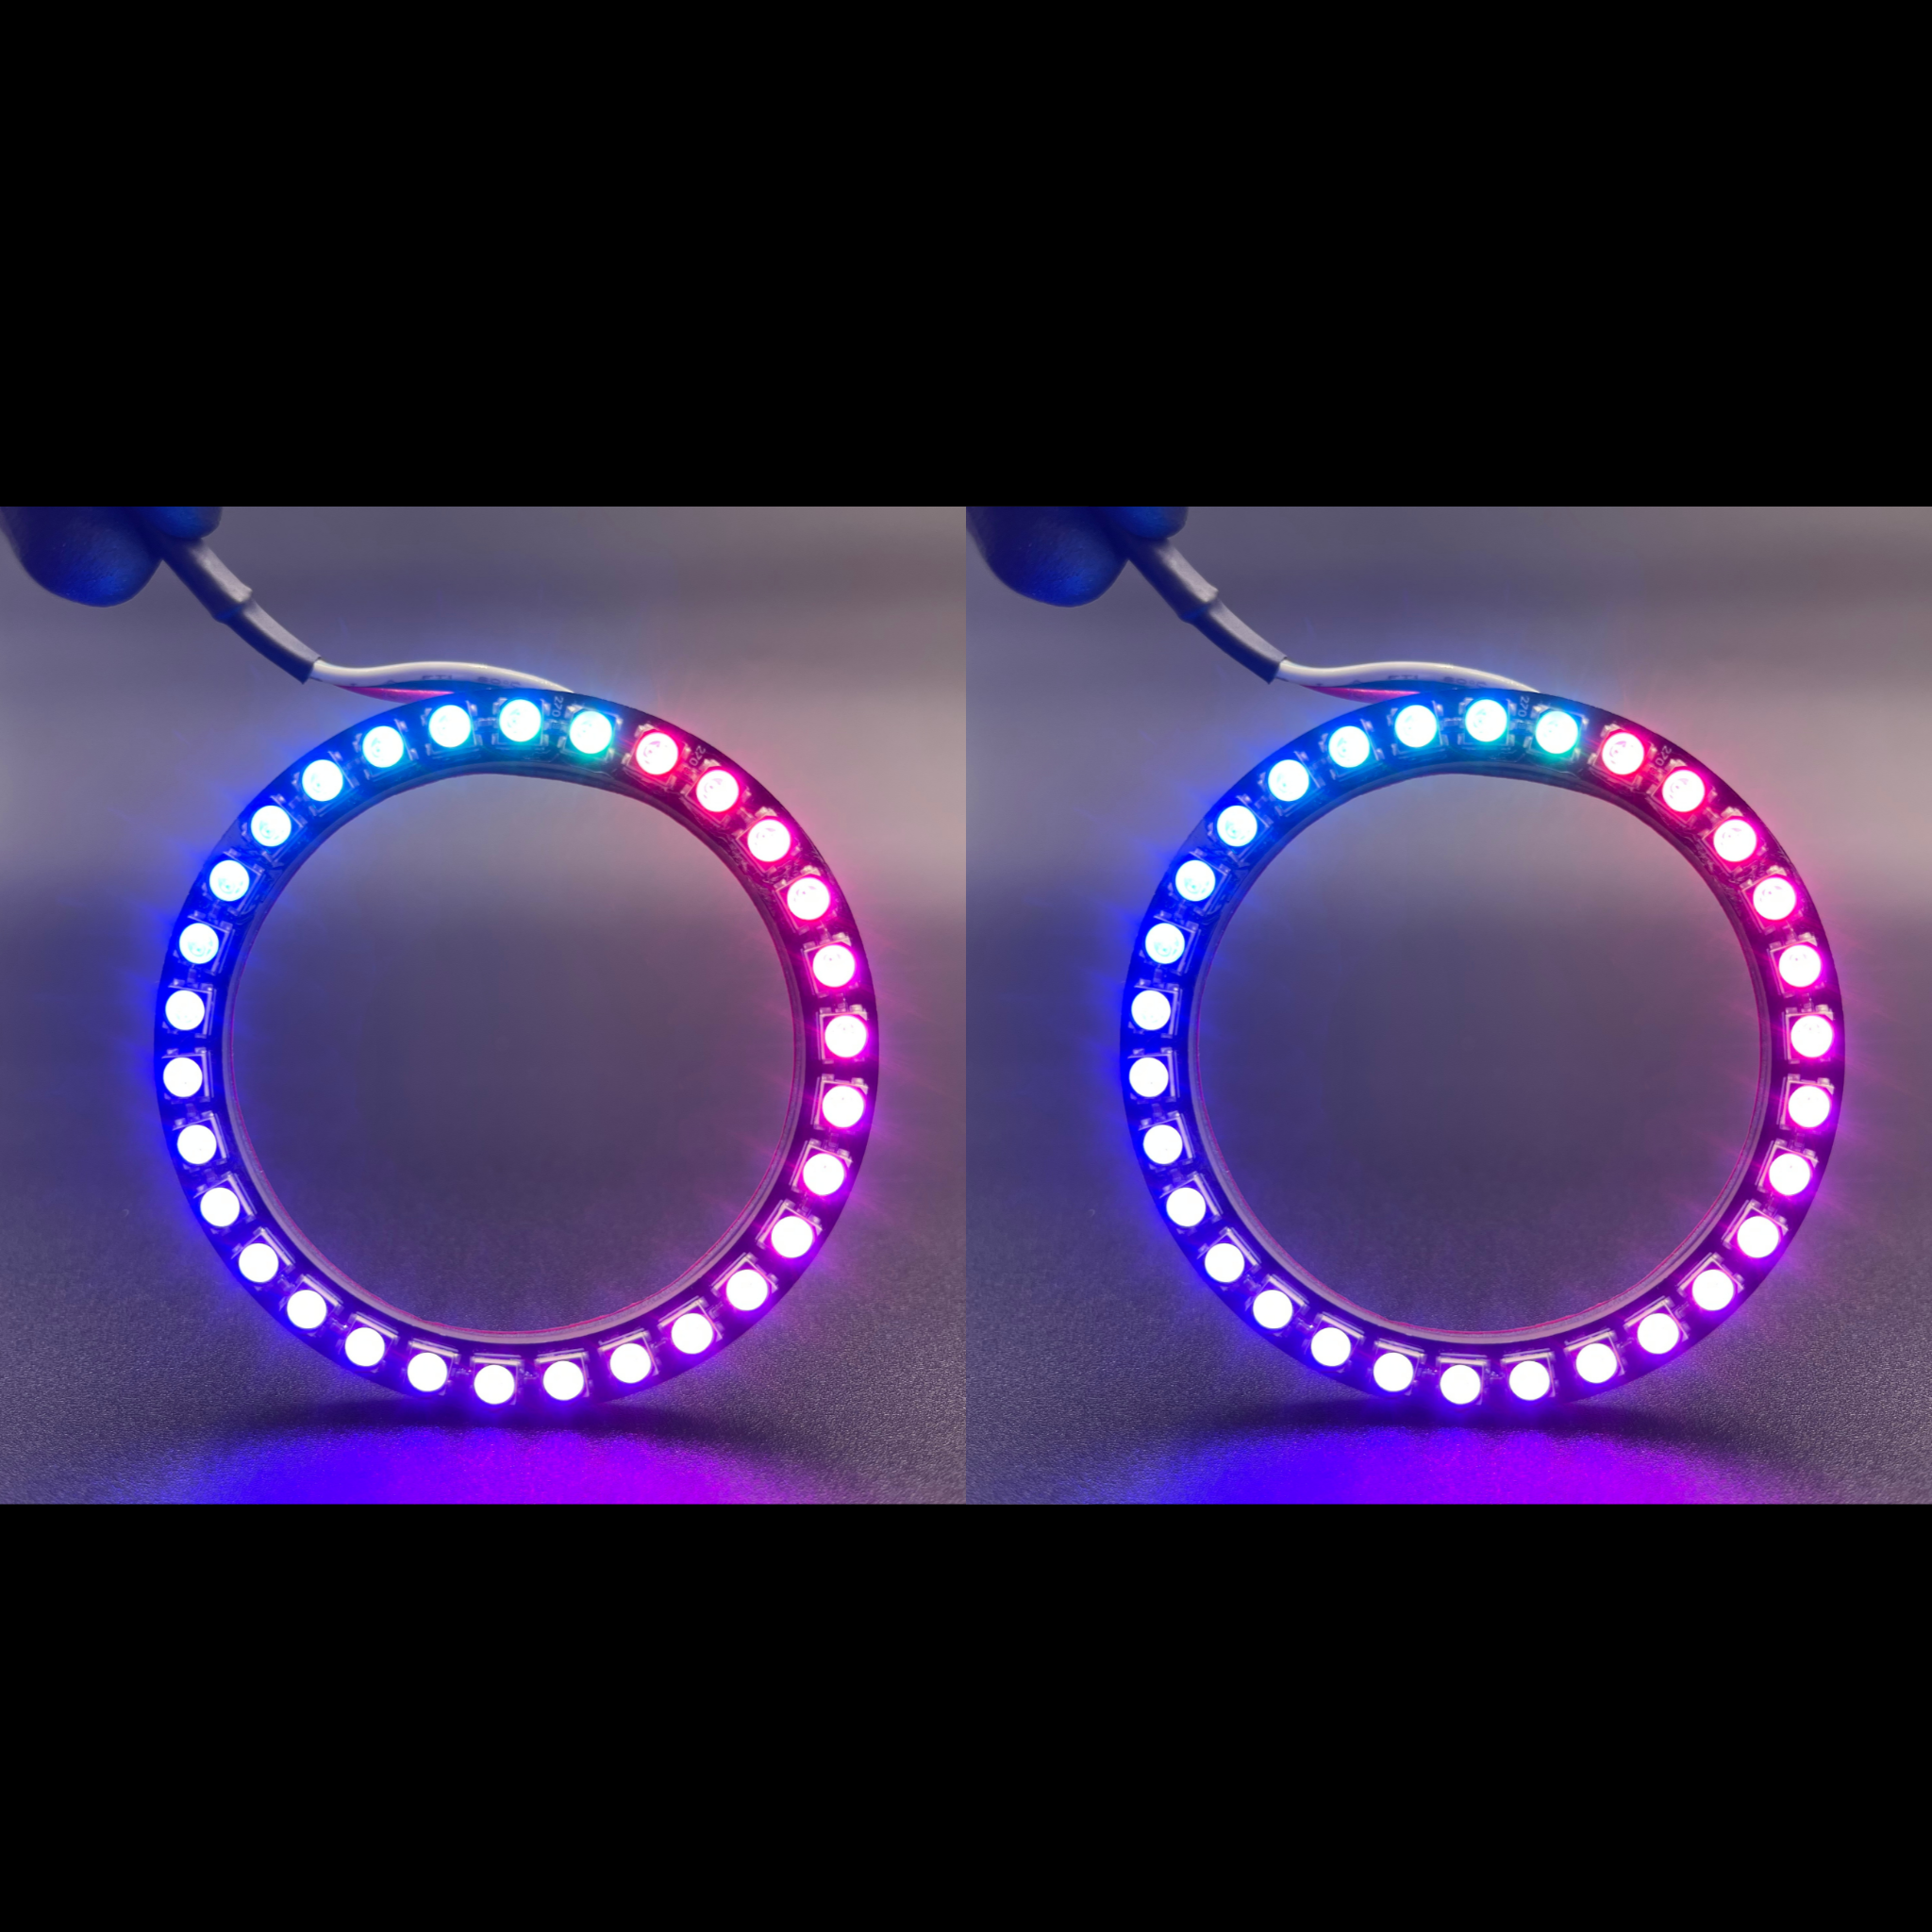 2004-2008 Chrysler Pacifica Multicolor Halo Kit - RGB Halo Kits Multicolor Flow Series Color Chasing RGBWA LED headlight kit Colorshift Oracle Lighting Trendz OneUpLighting Morimoto theretrofitsource AutoLEDTech Diode Dynamics